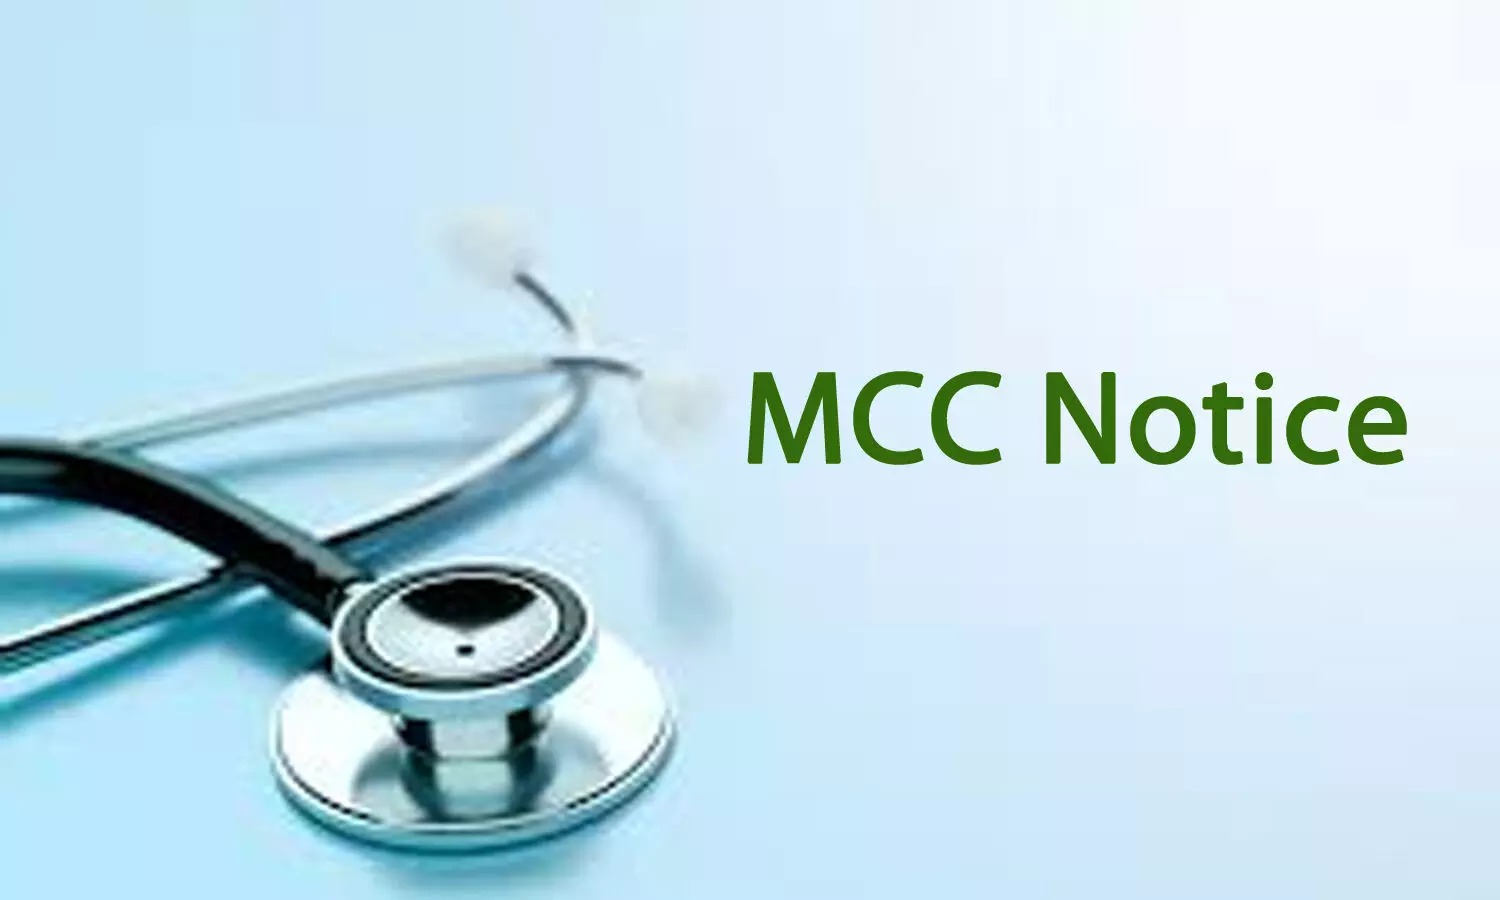 Upload fee structure of DM, MCh, DNB SS courses on your websites: MCC to institutes participating in NEET SS counselling